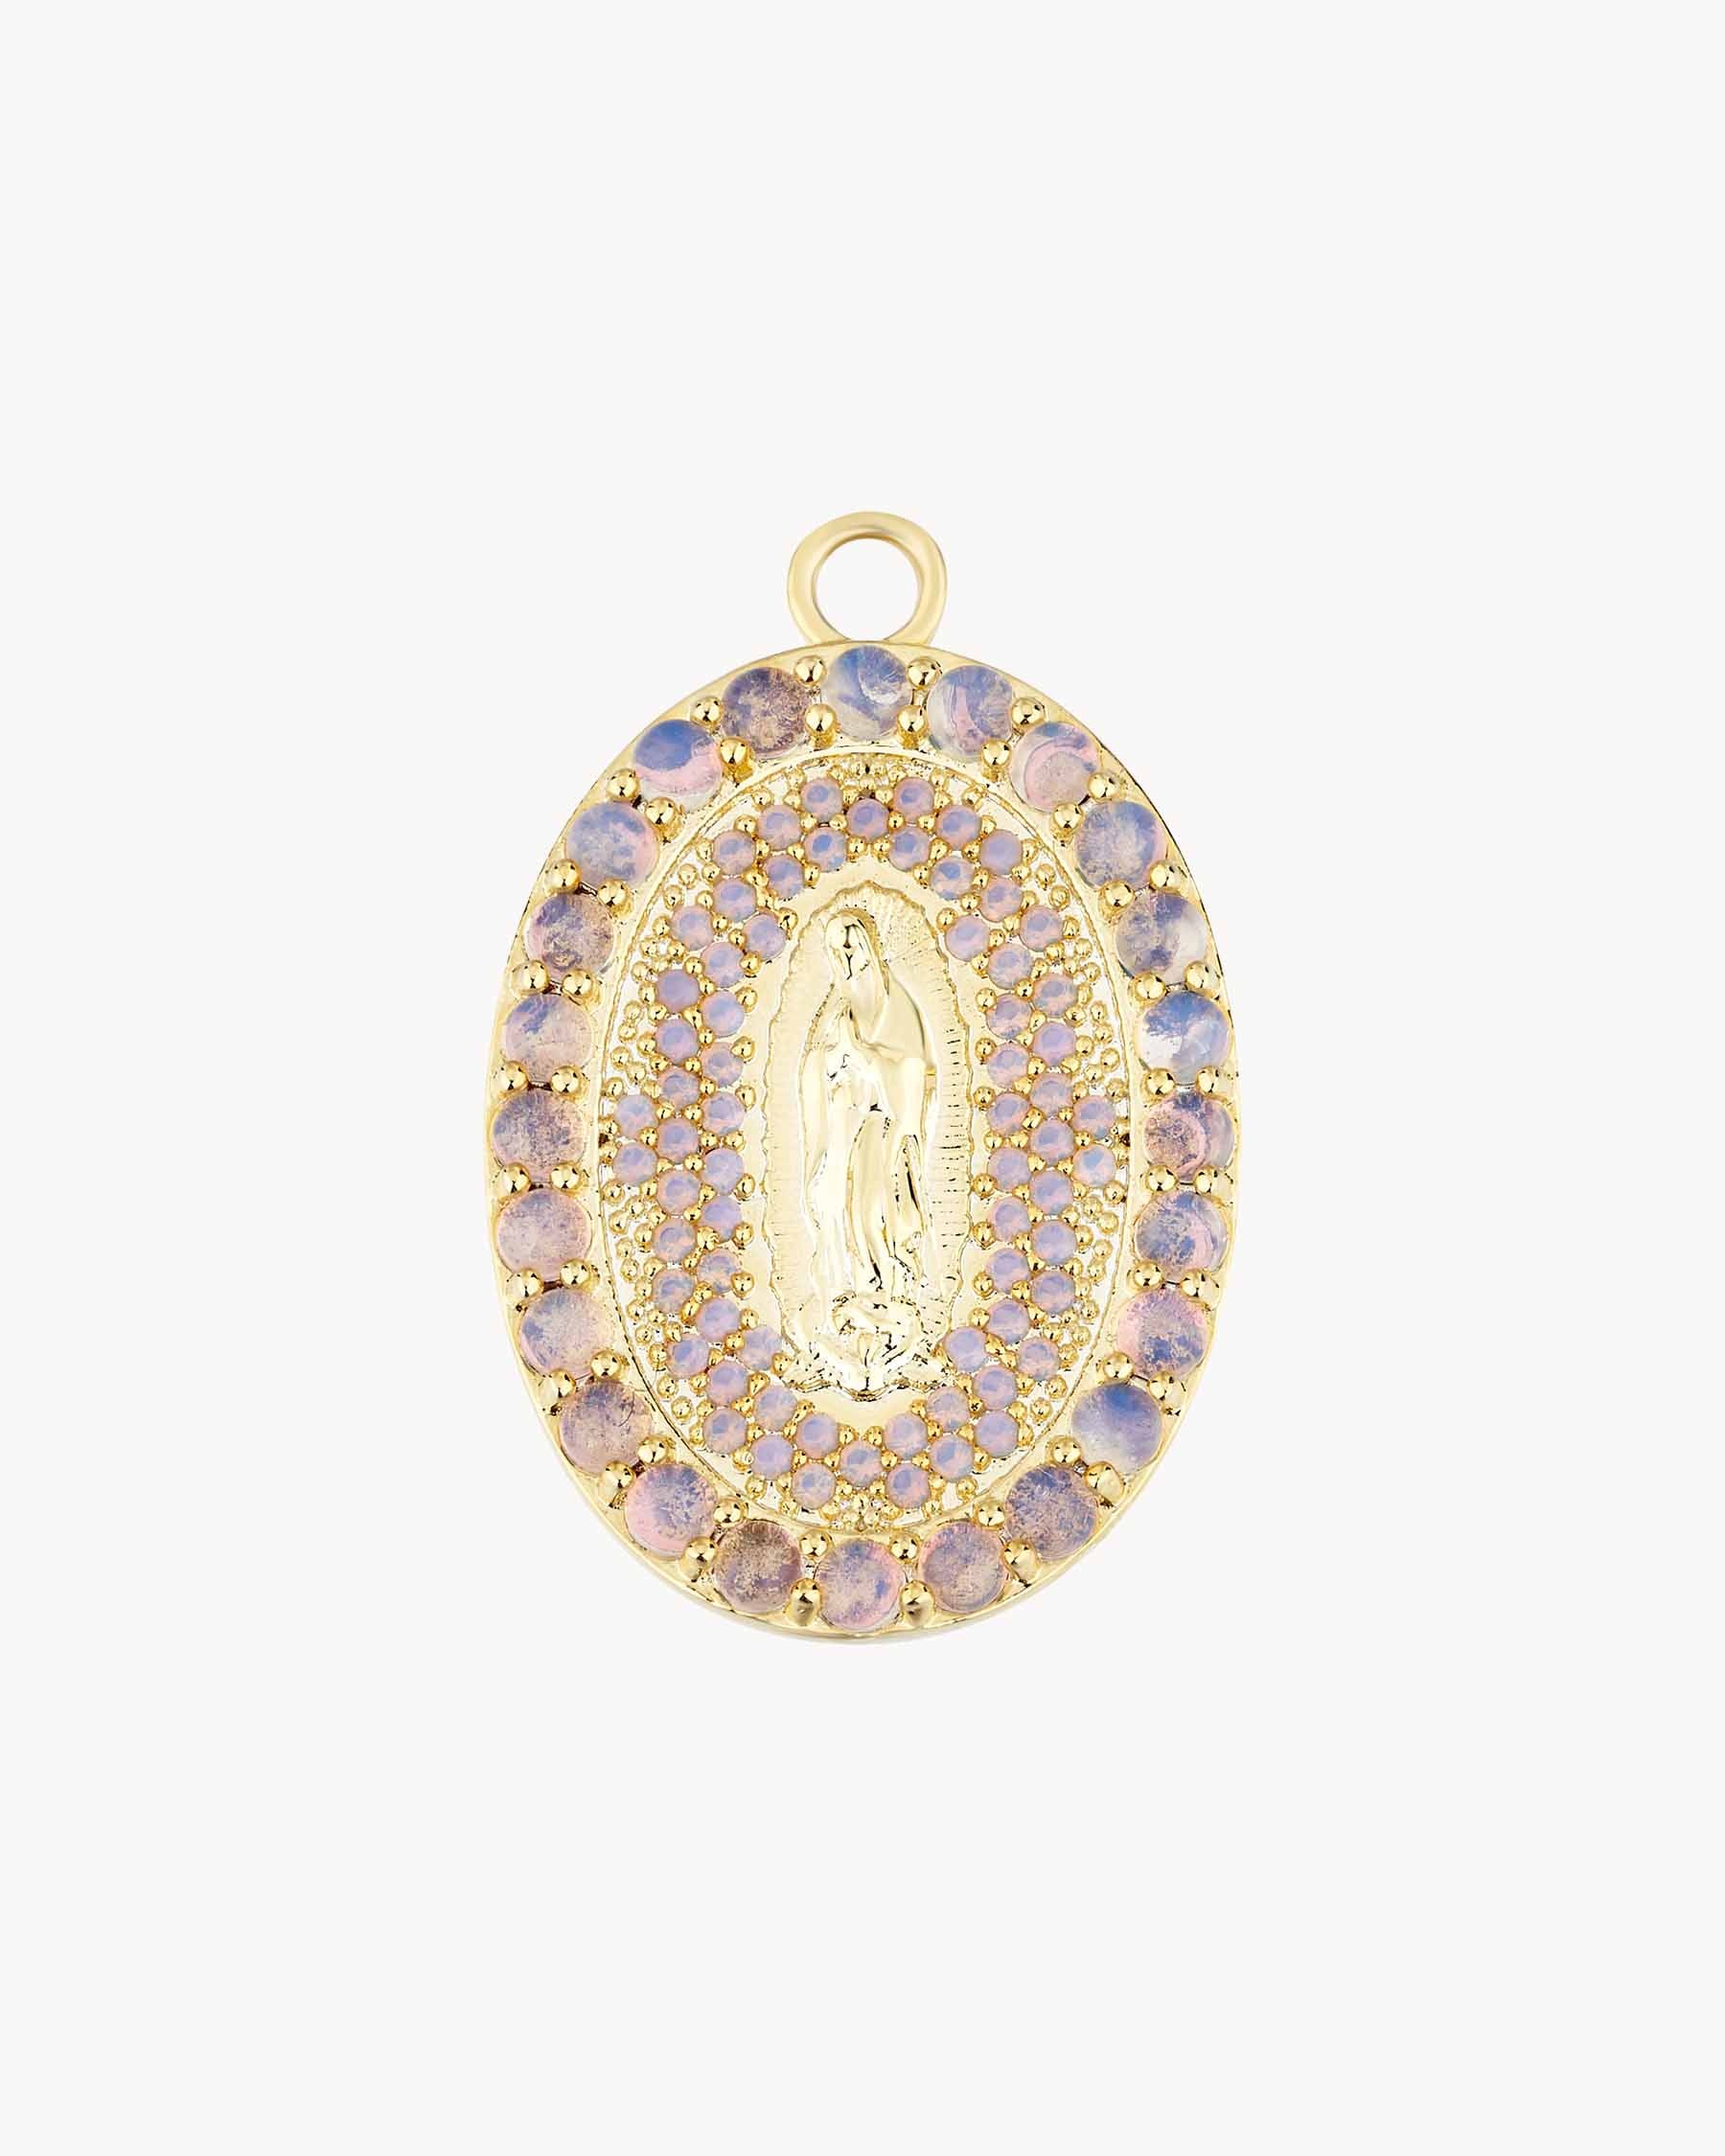 Virgin Of Guadalupe Charm